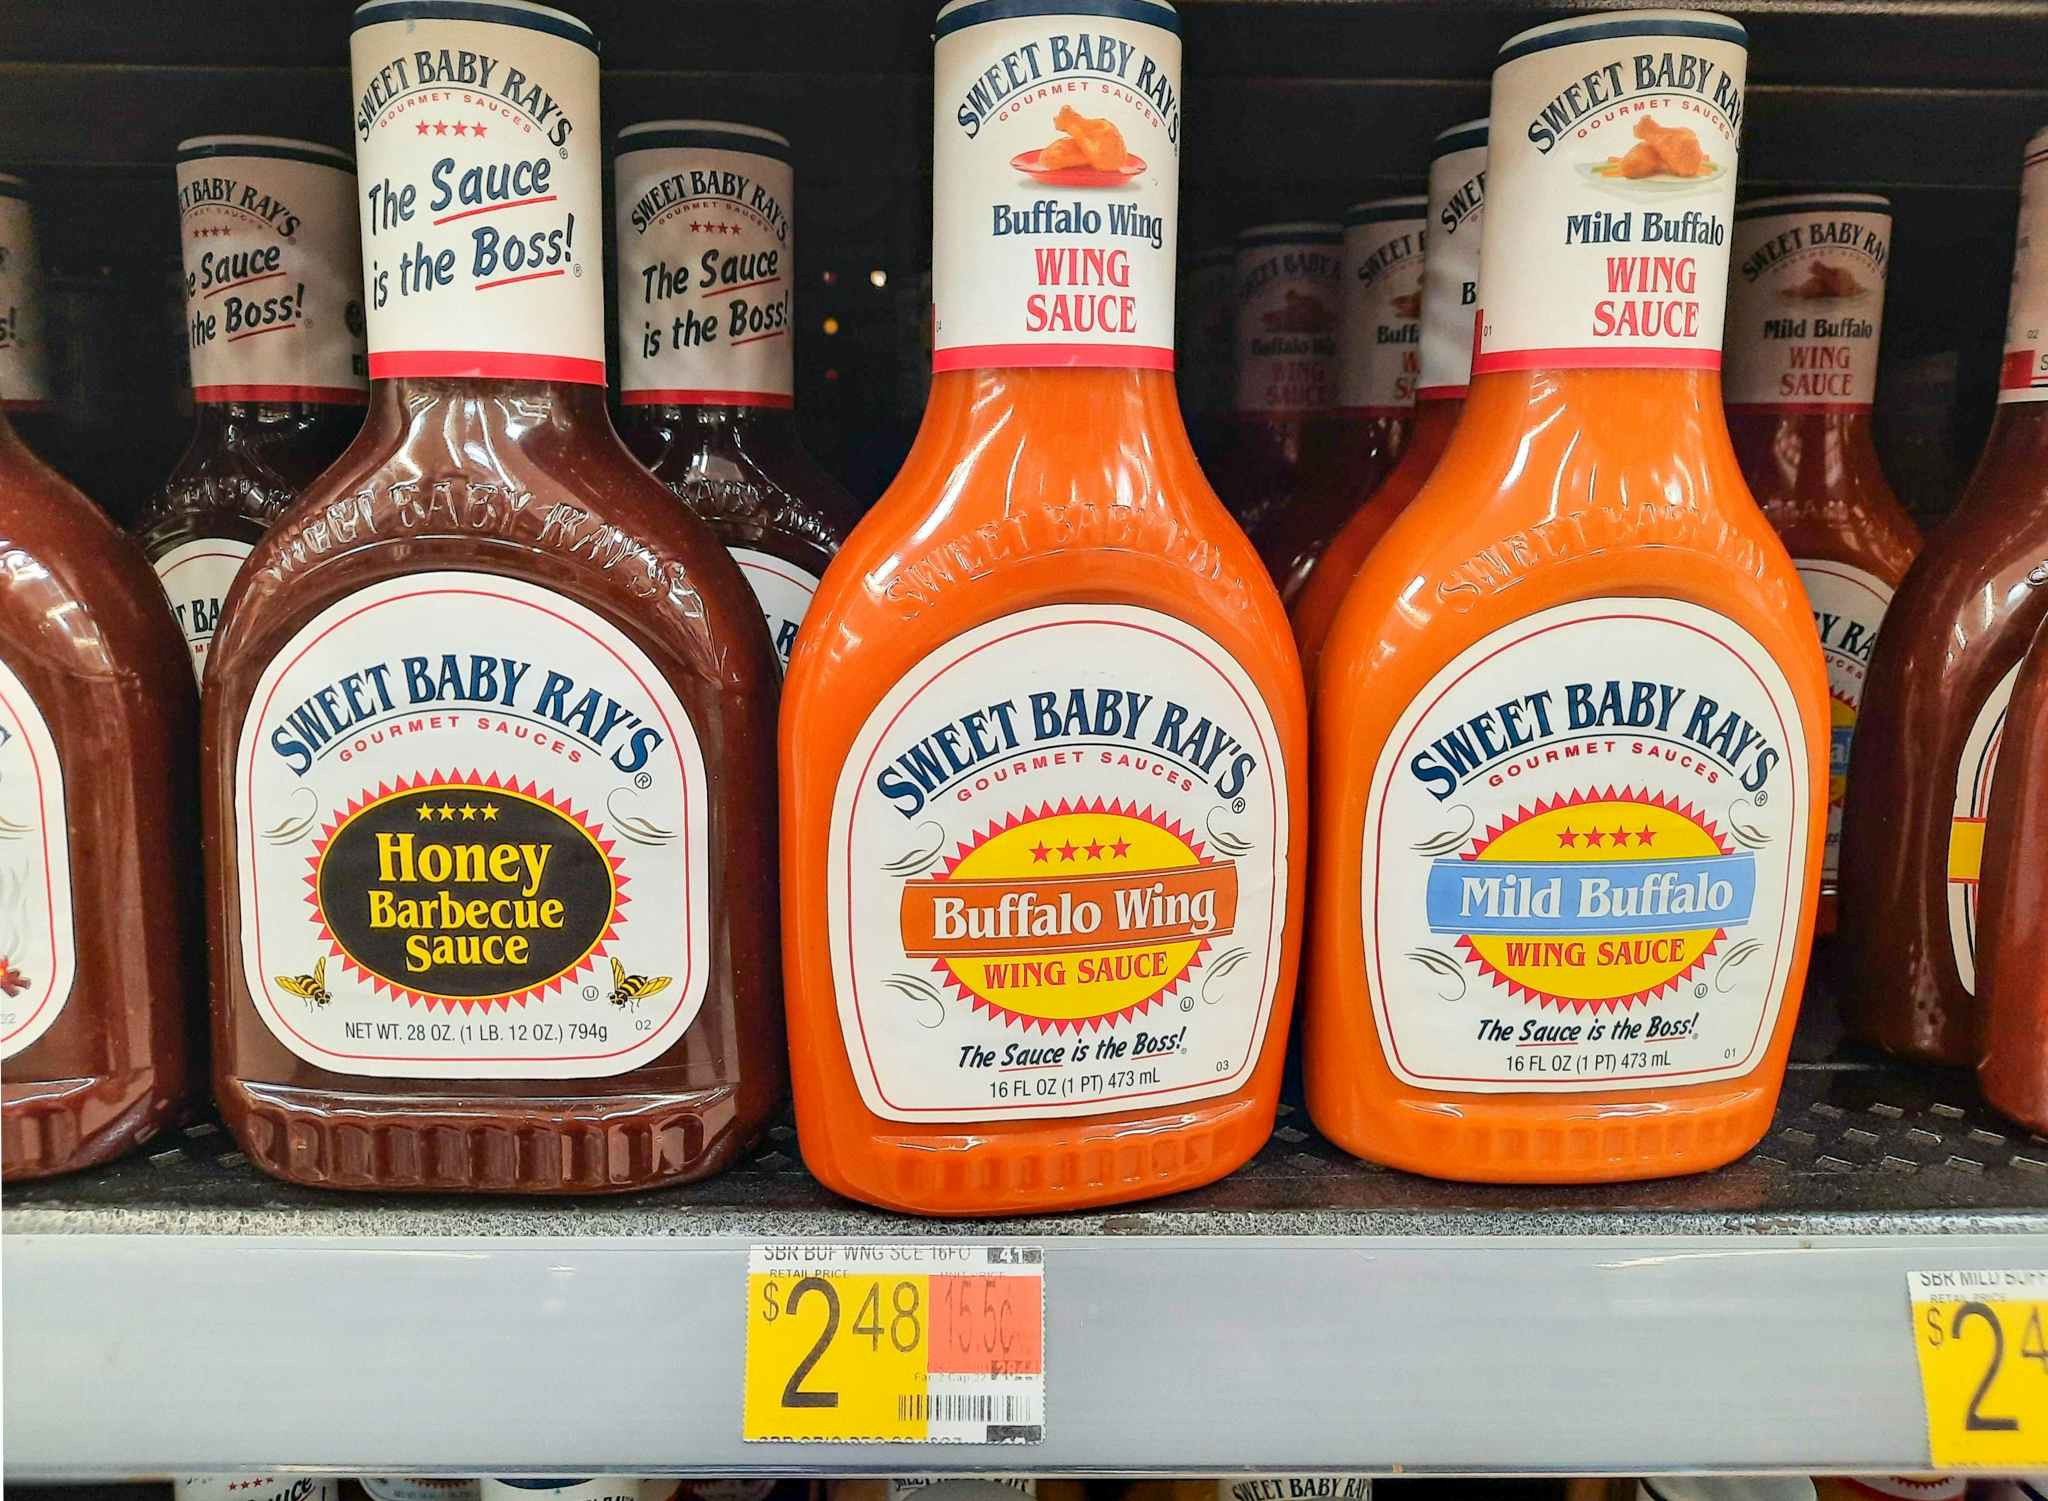 Sweet Baby Rays Wing Sauce on display at Walmart